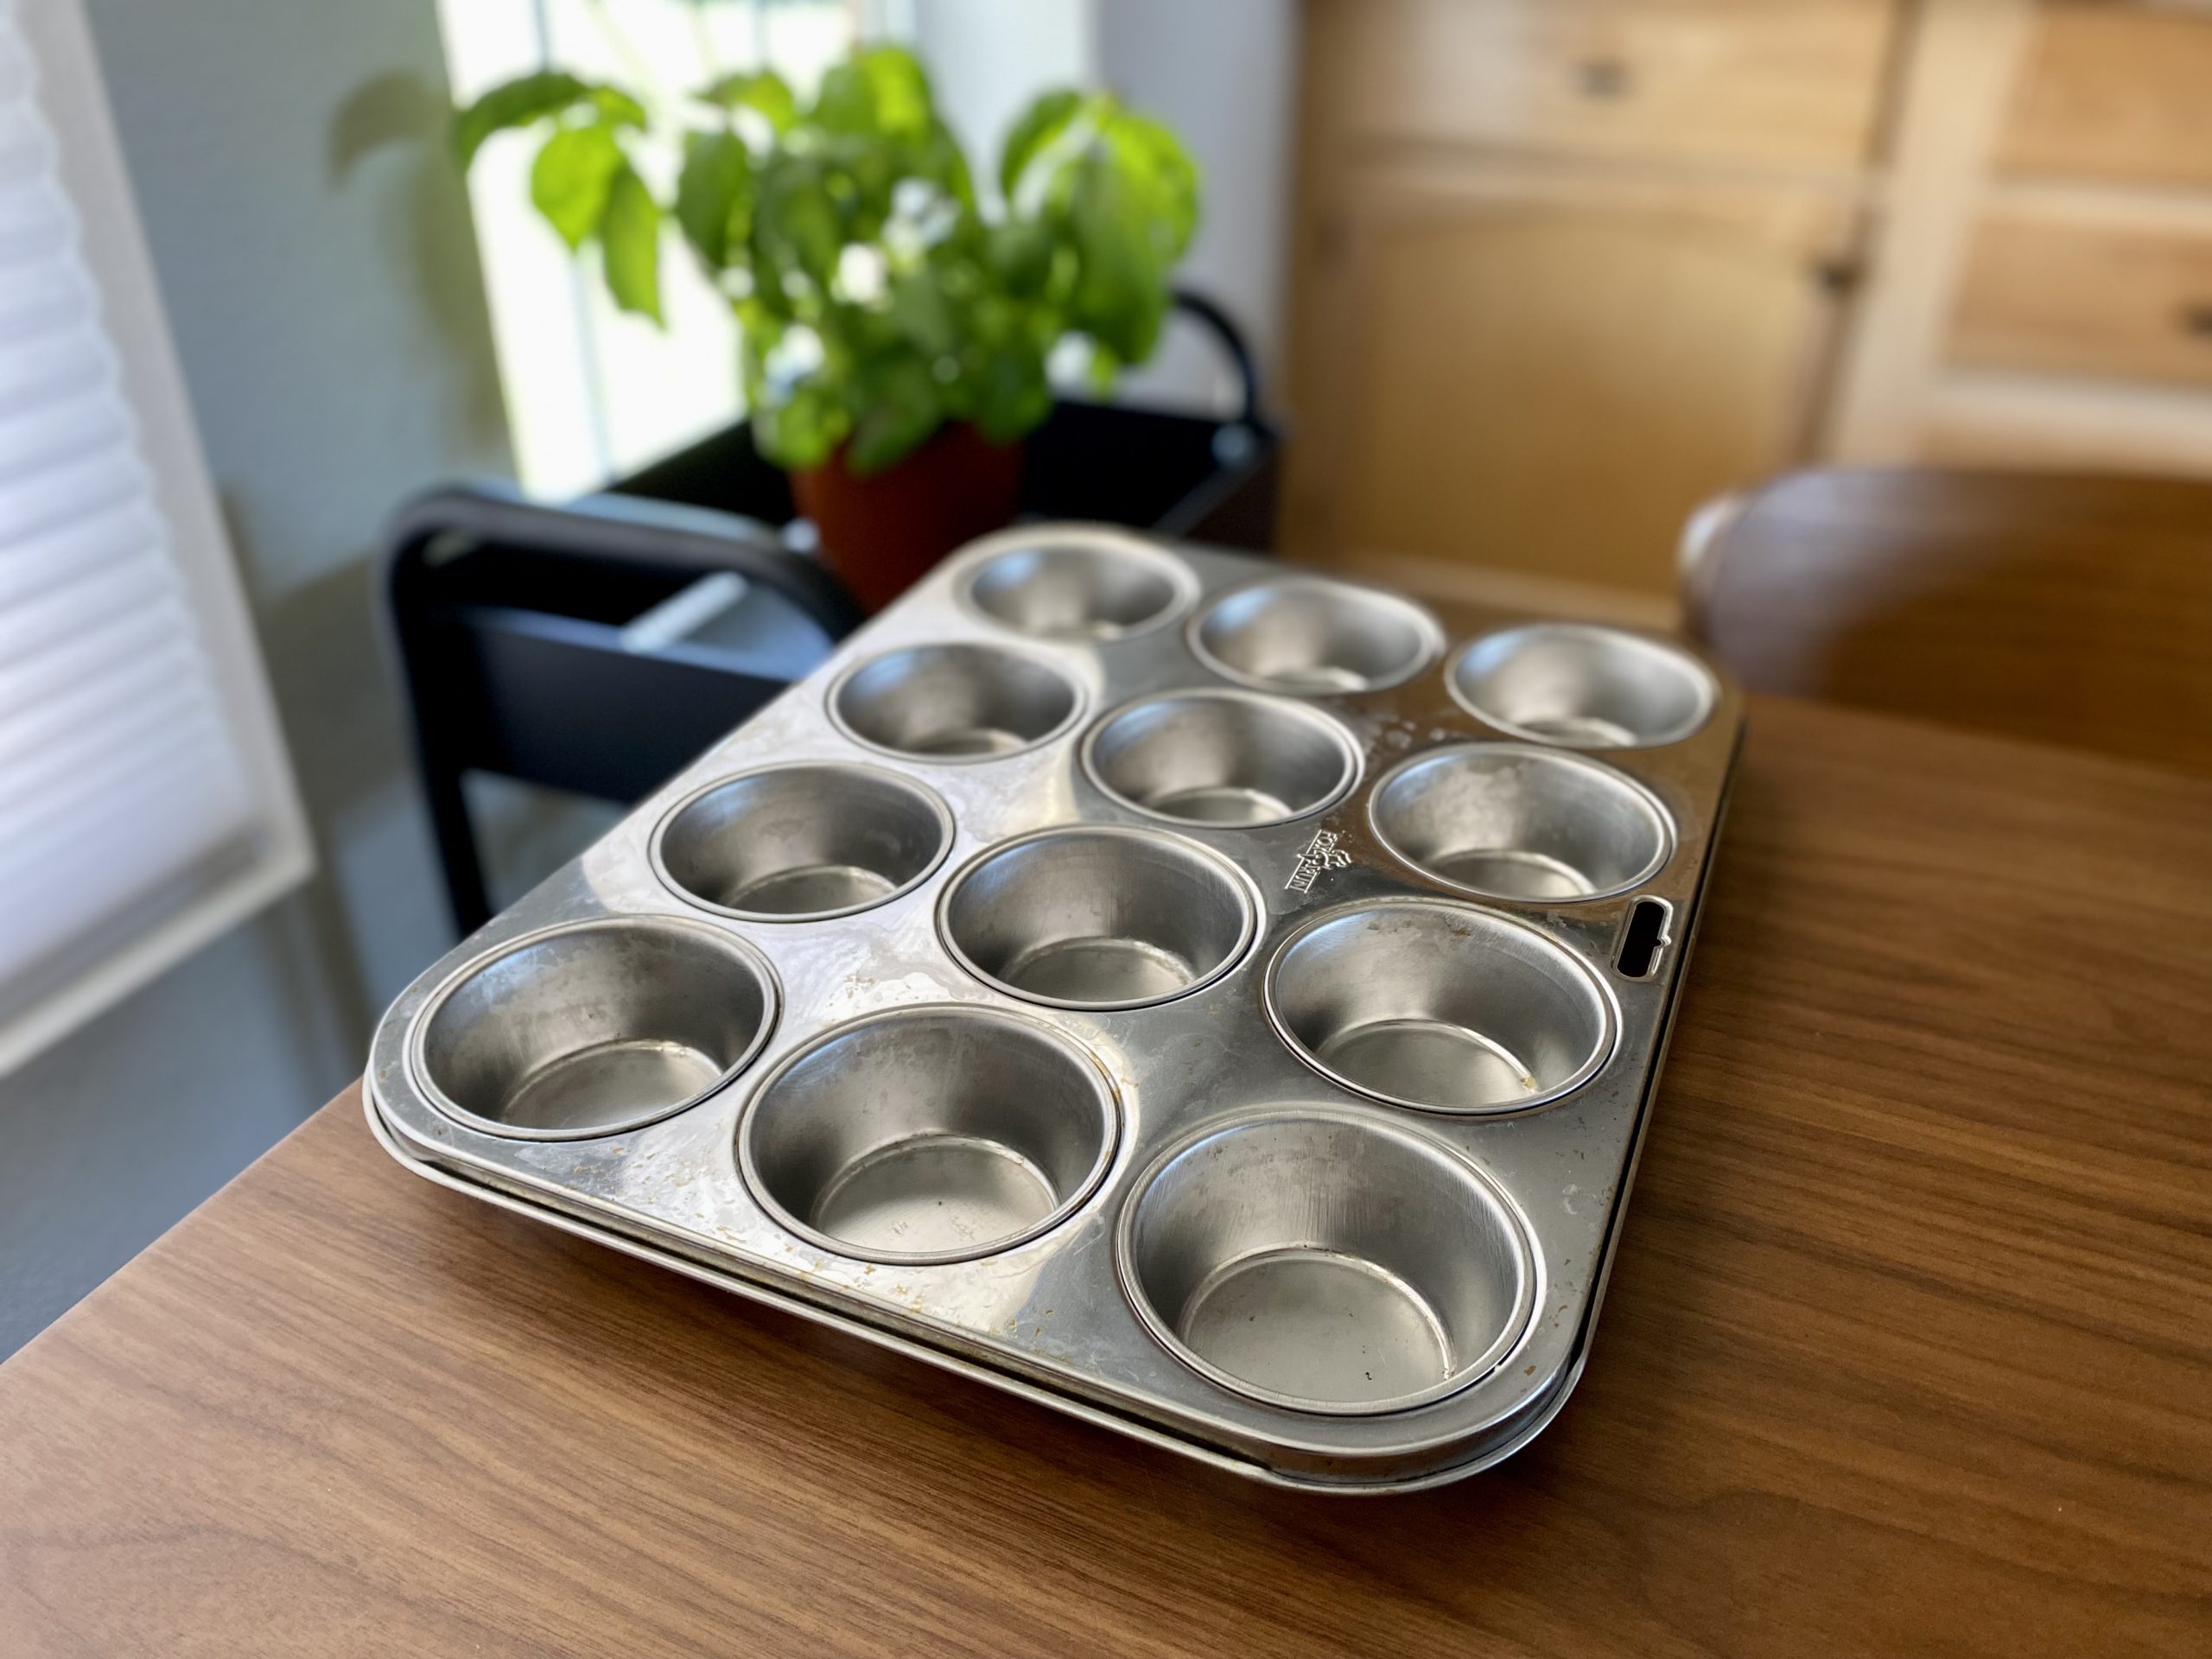 Fox Run 4868 Muffin Pan, 12 Cup, Stainless Steel